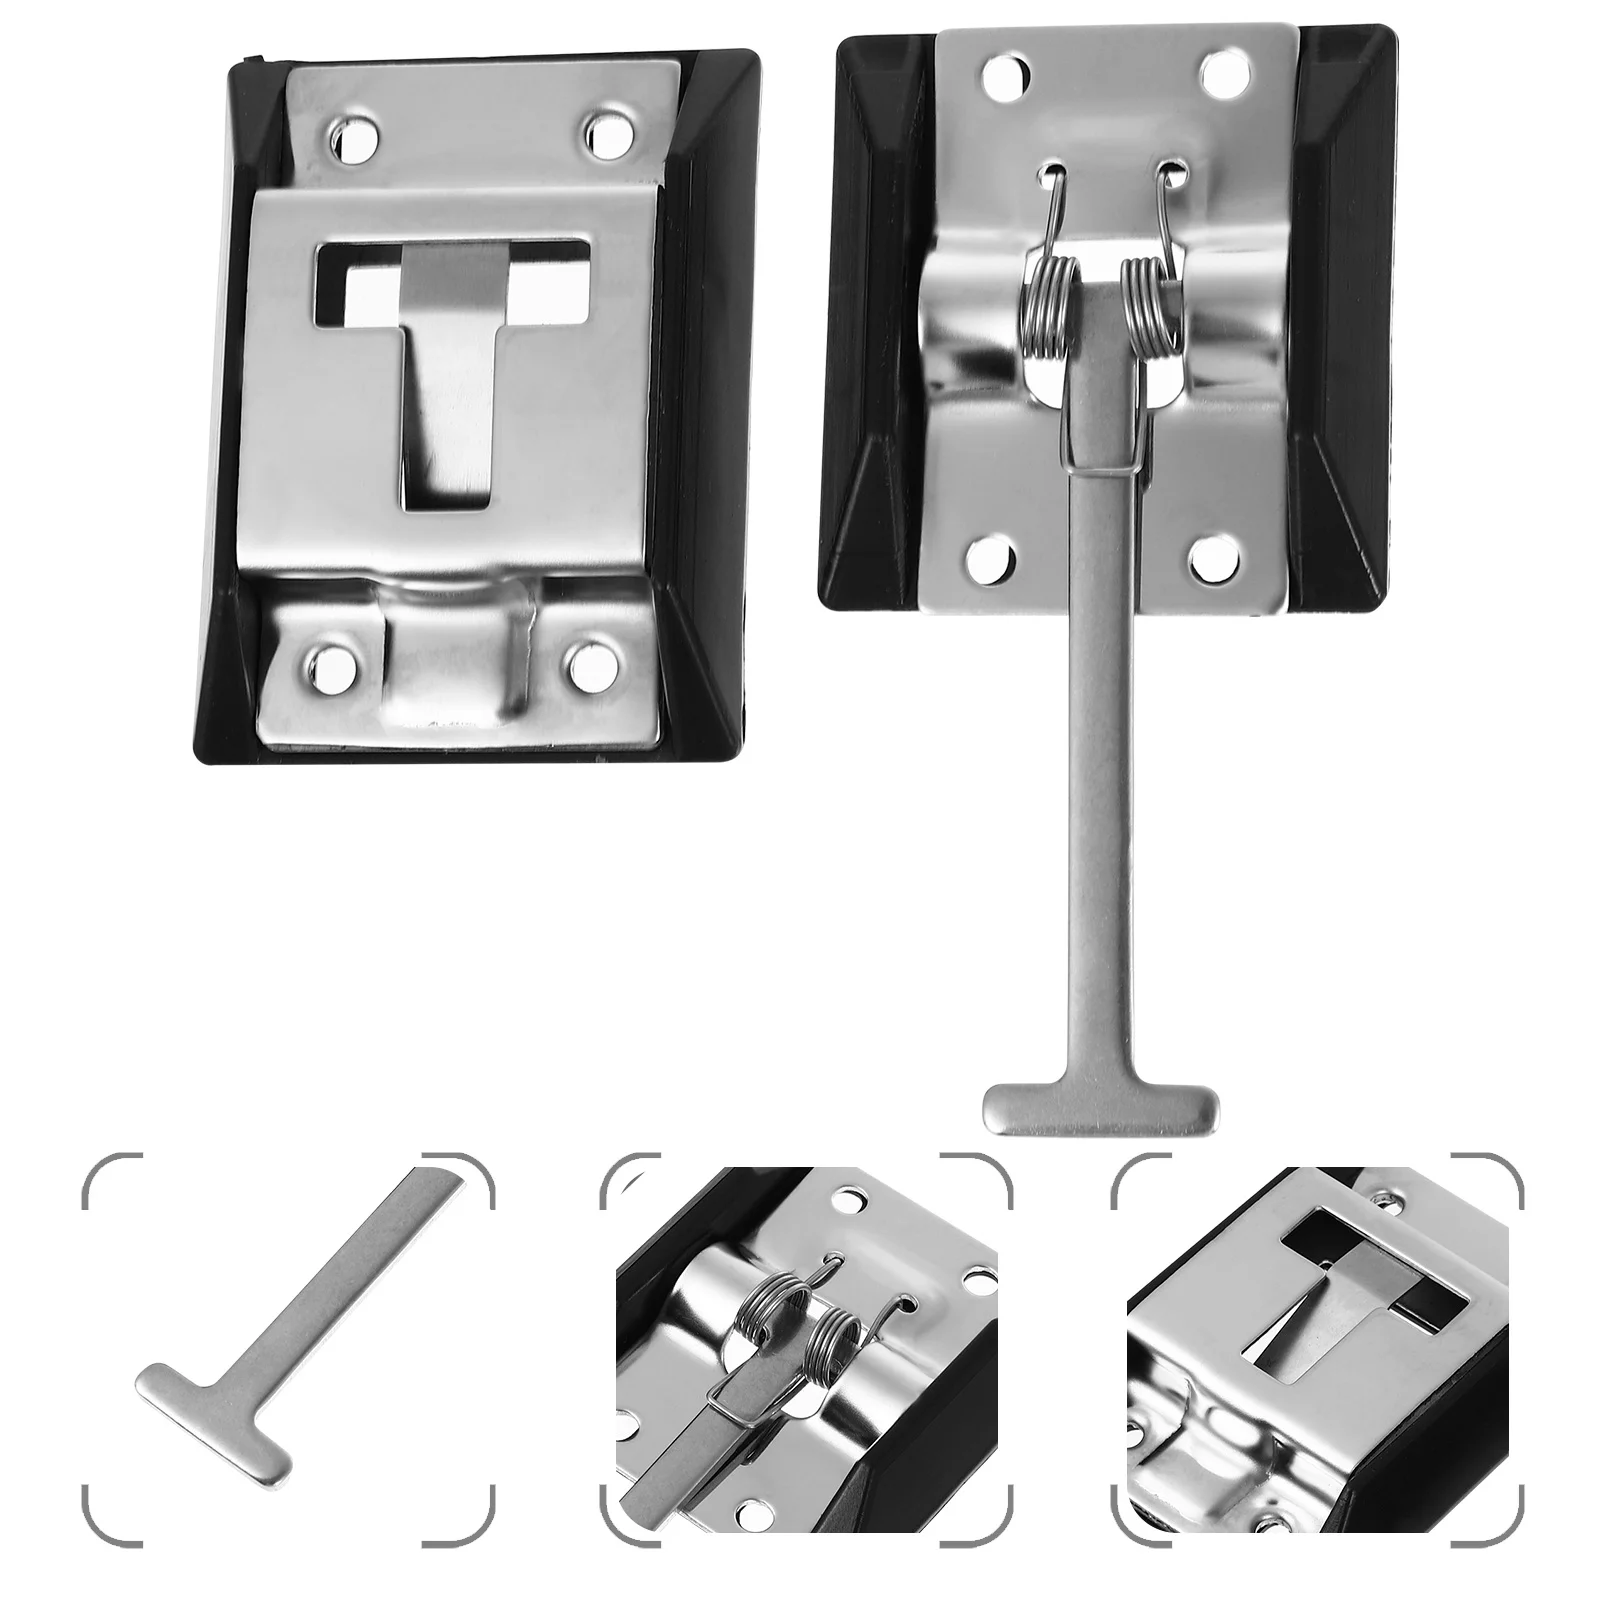 

Metal T-Style Entry Door Catch Holder For RV Camper Trailer Supplies (Stainless Steel / Carbon Steel With Zinc Coating )